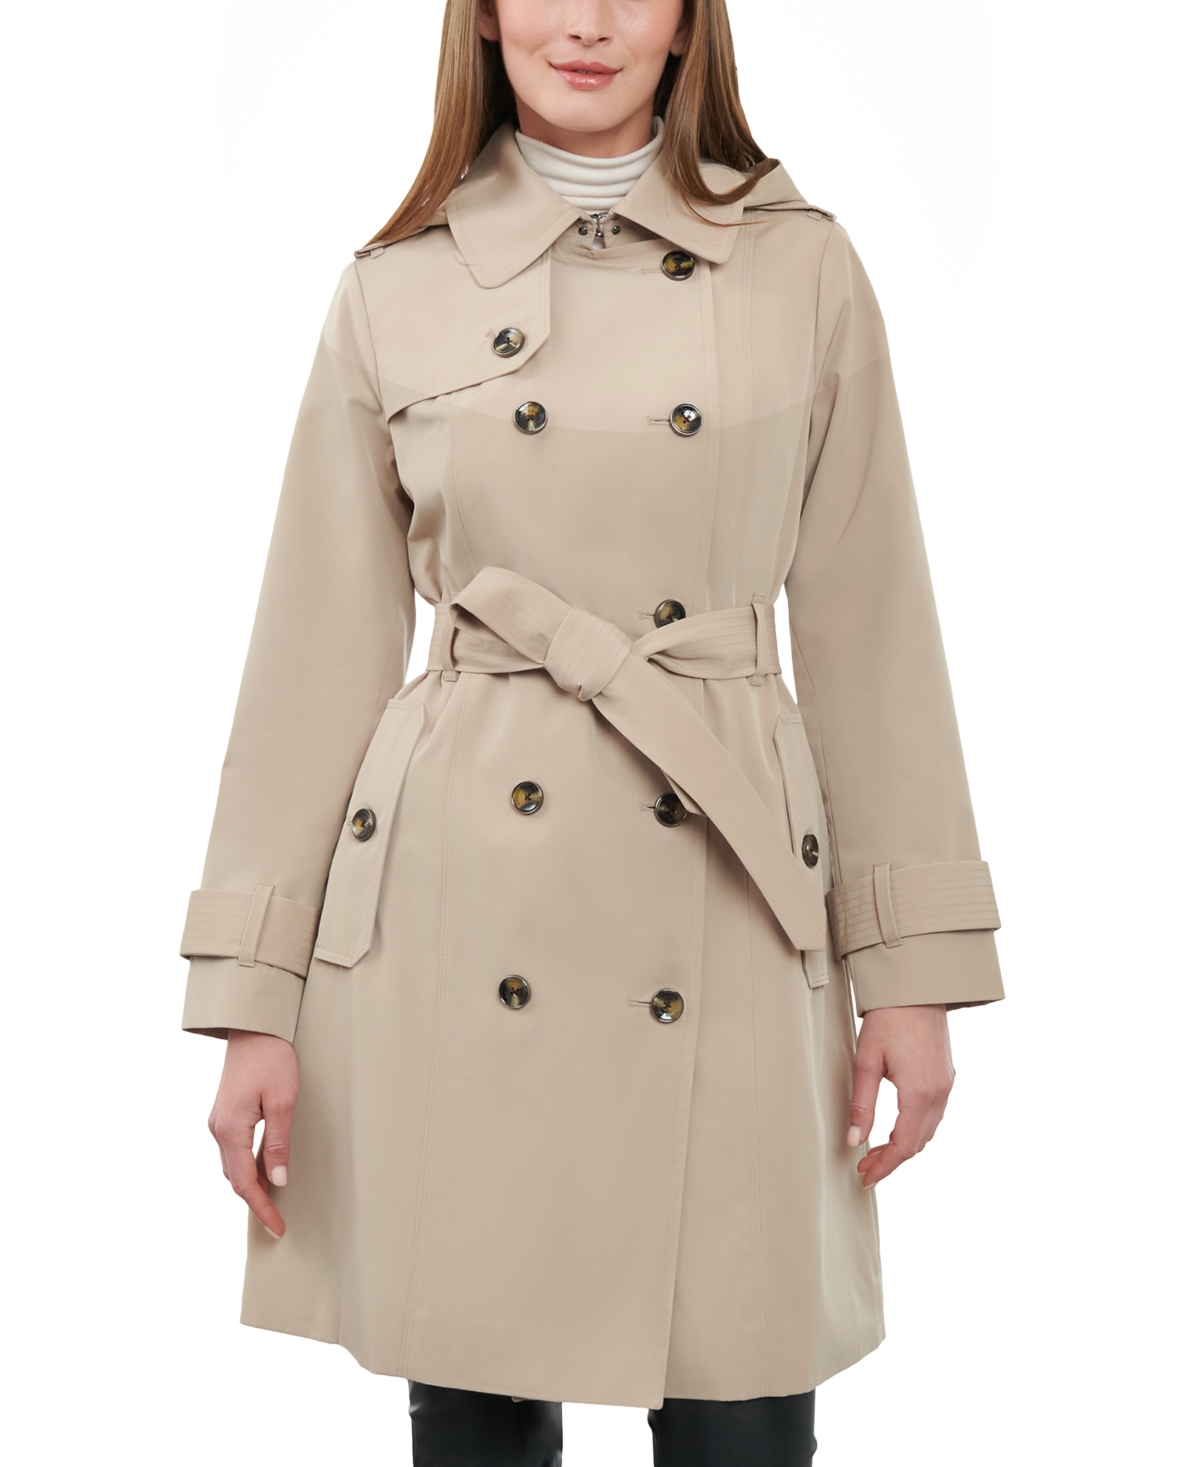 Women's 38" Double-Breasted Hooded Trench Coat - British Khaki